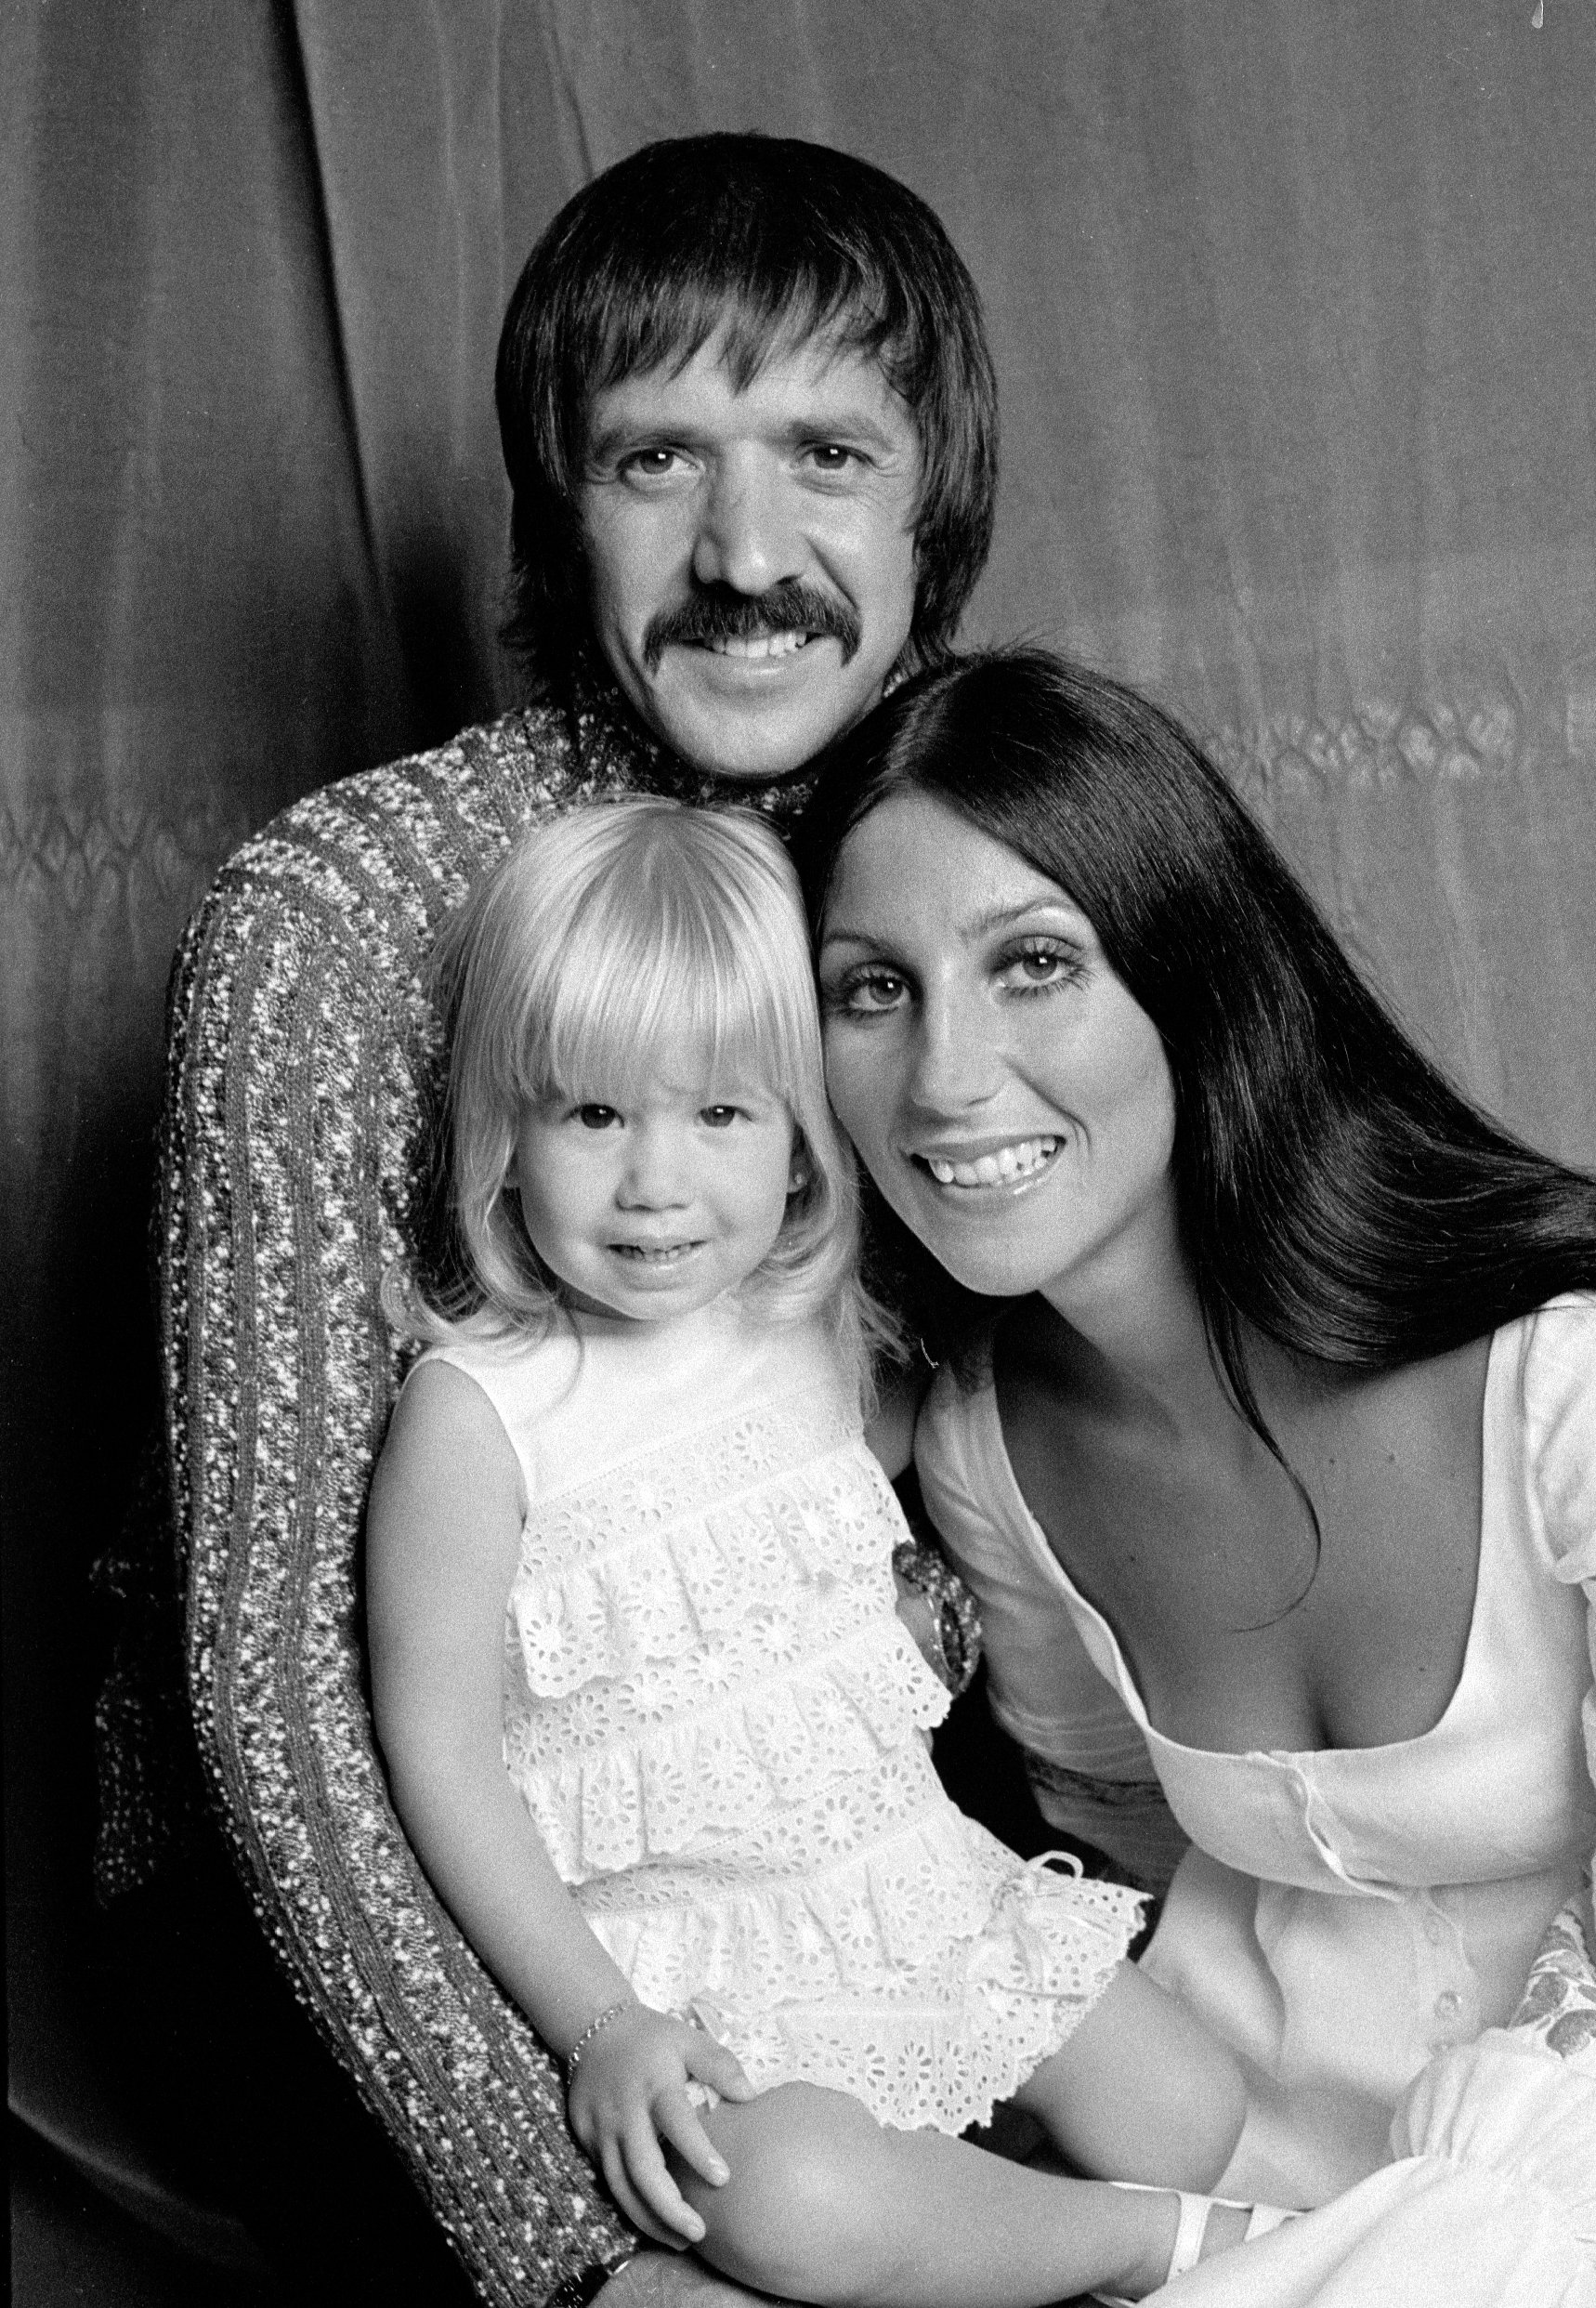 Singers Sonny Bono and Cher pose with their daughter Chastity Bono for the television variety show 'The Sonny and Cher Comedy Hour,' July 1, 1971. | Source: Getty Images